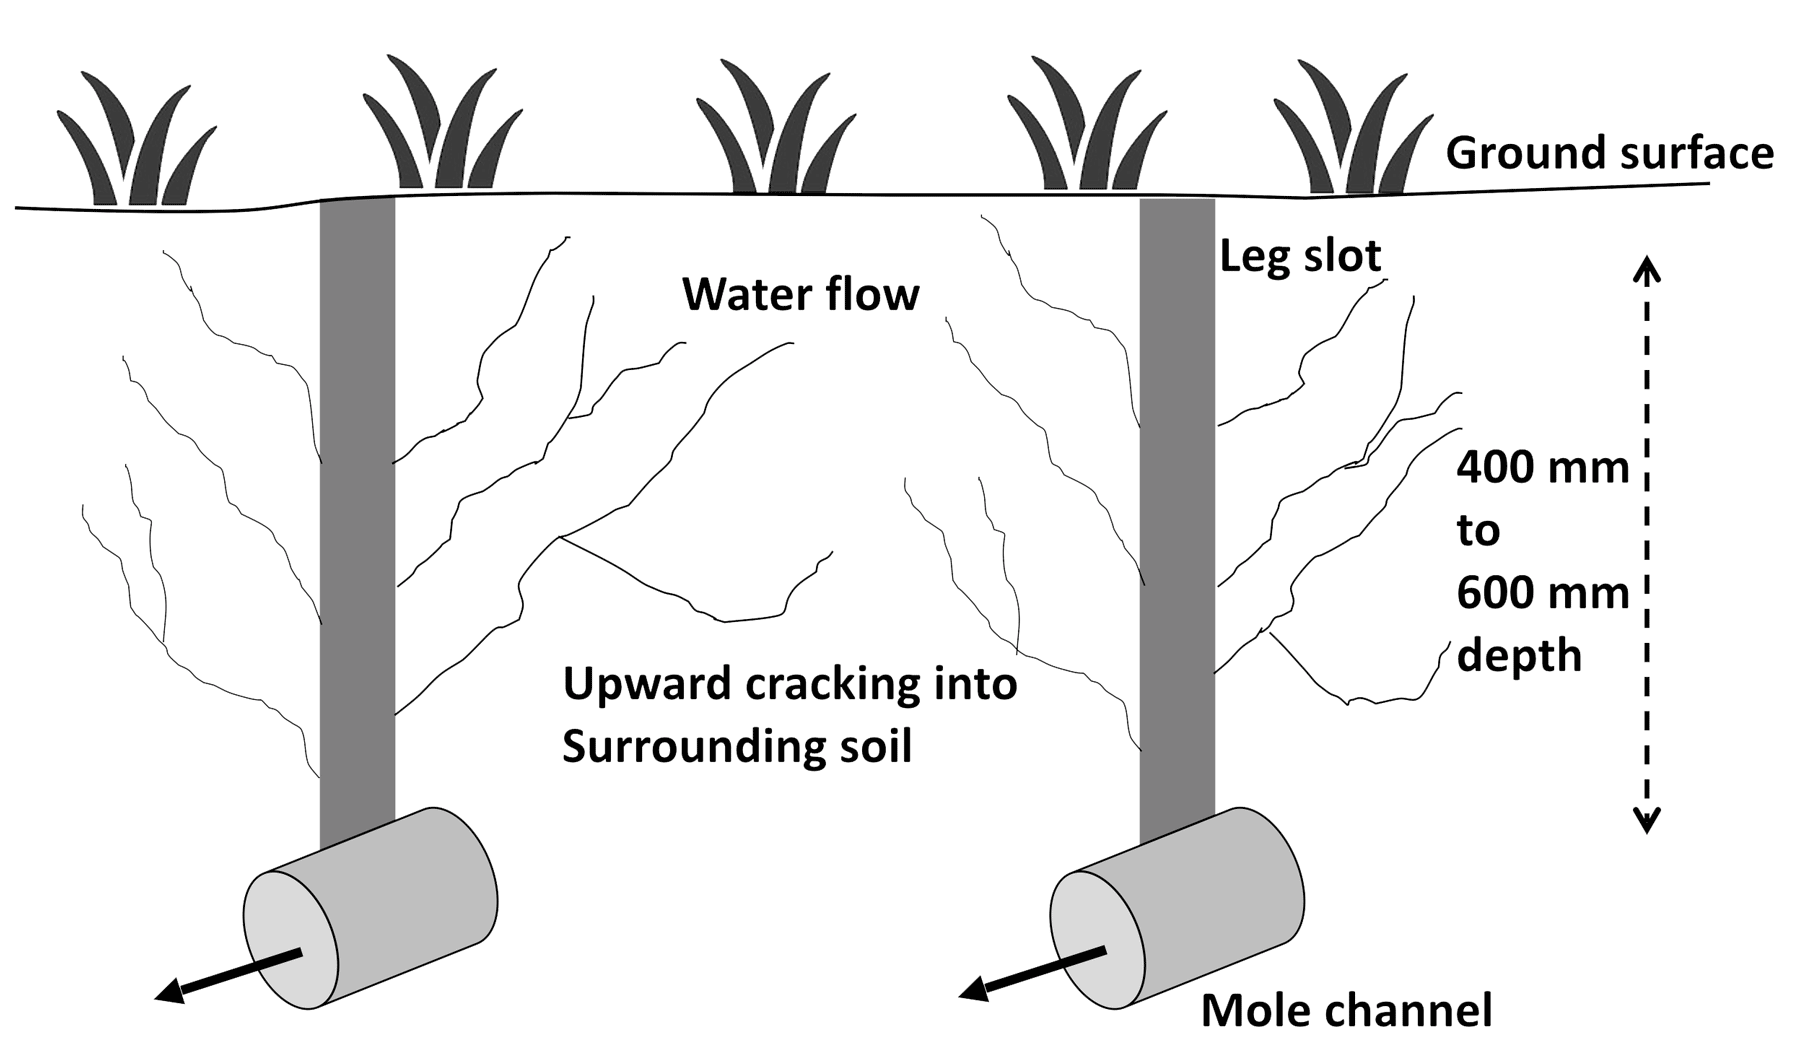 Cross section of a mole drained paddock. Mole drains installed by the mole plough at the appropriate soil moisture content to create upwards cracking into soil surrounding the mole channels. These cracks allow water to flow to the mole channel.